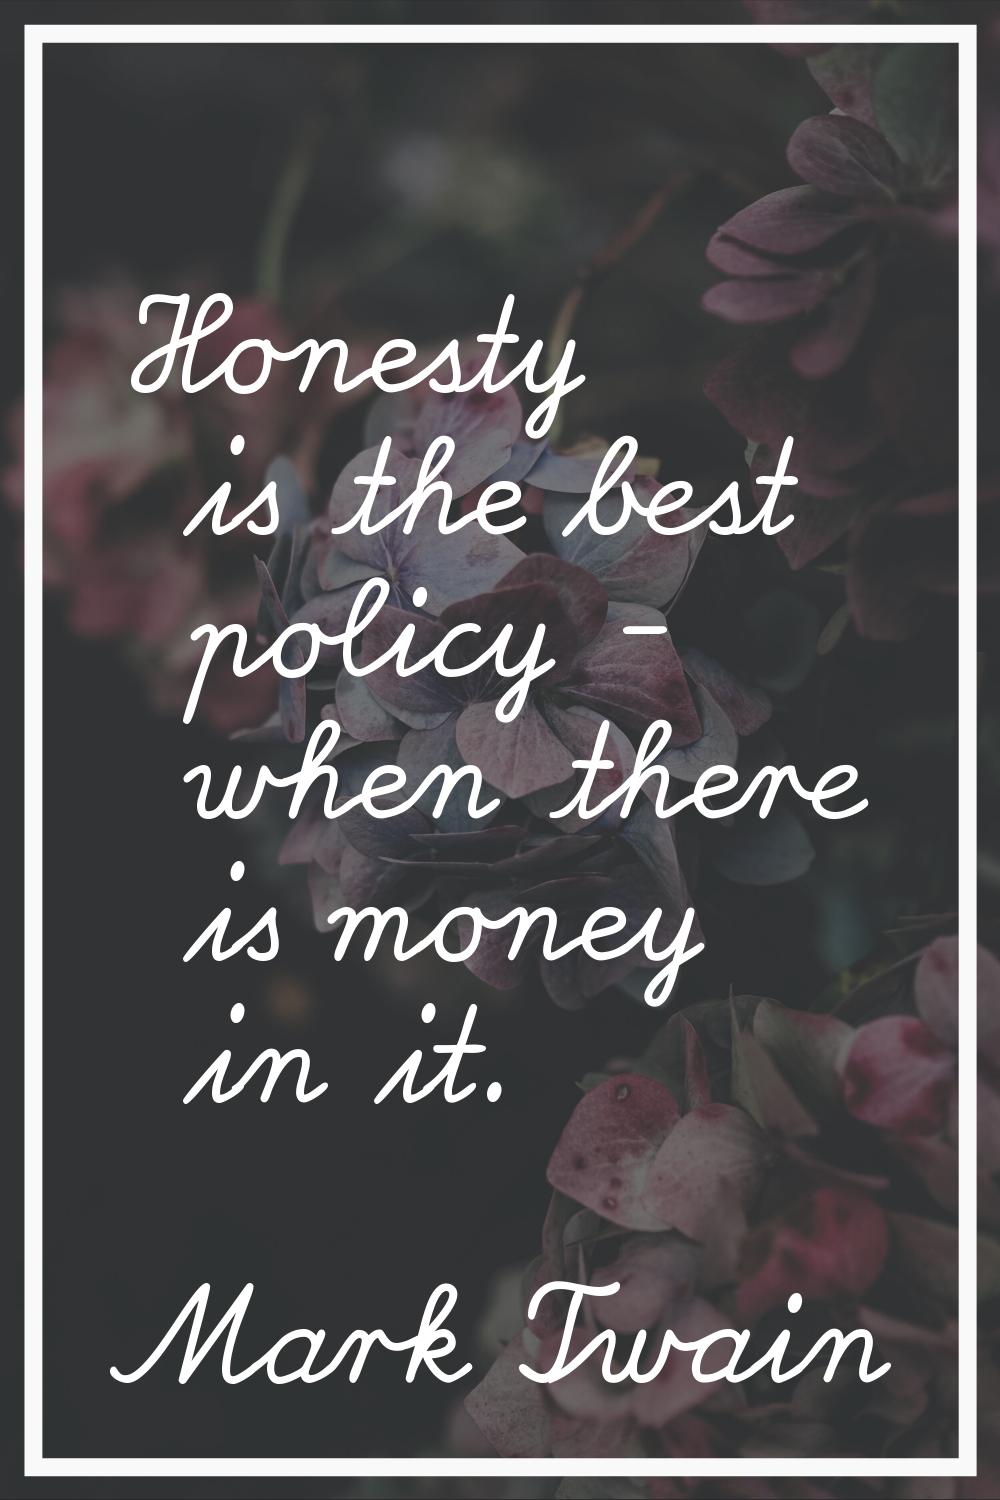 Honesty is the best policy - when there is money in it.